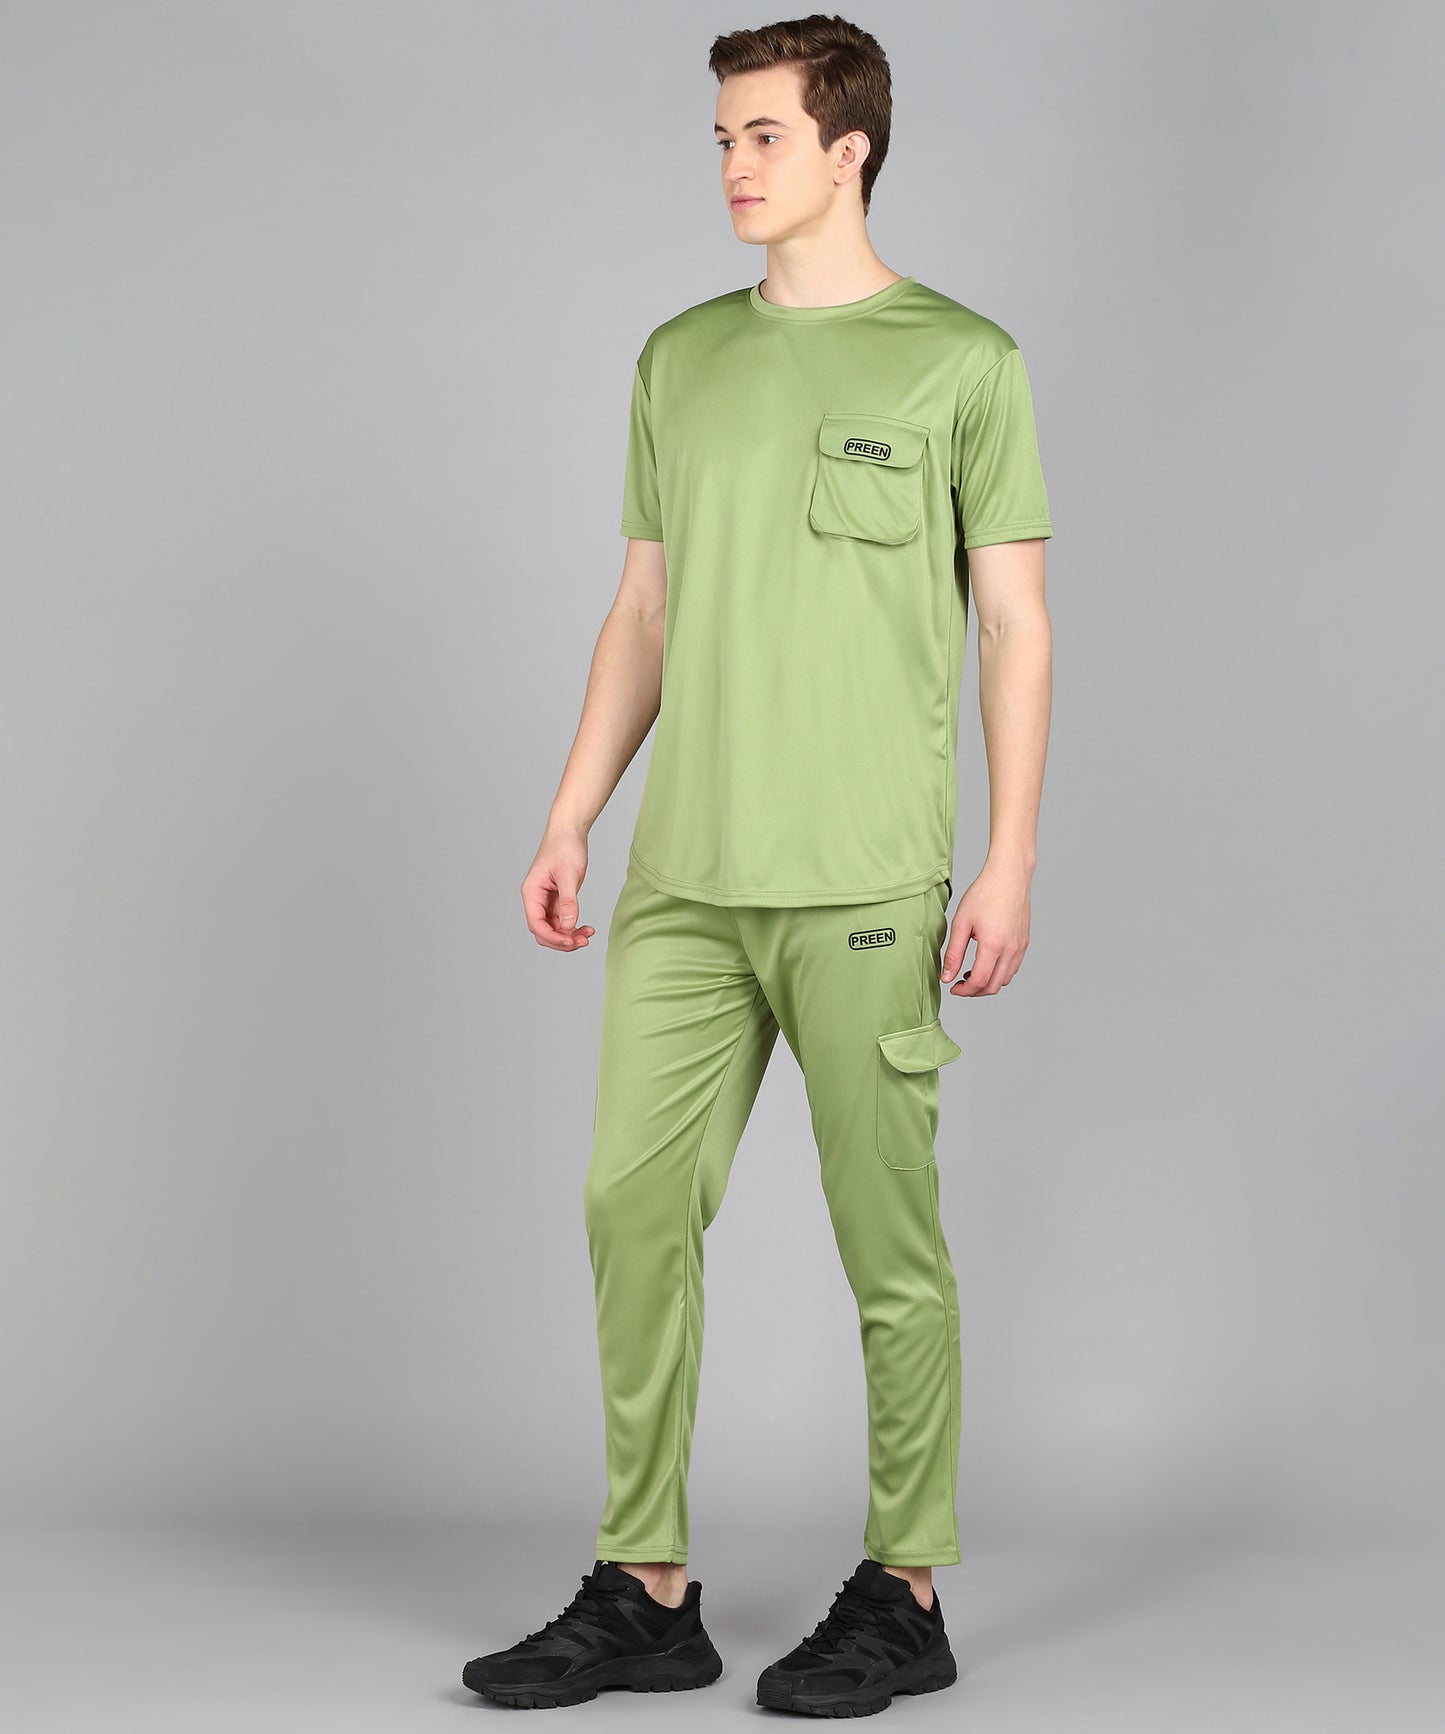 Preen Men's Pista Colour Solid T-shirt and Lower Set